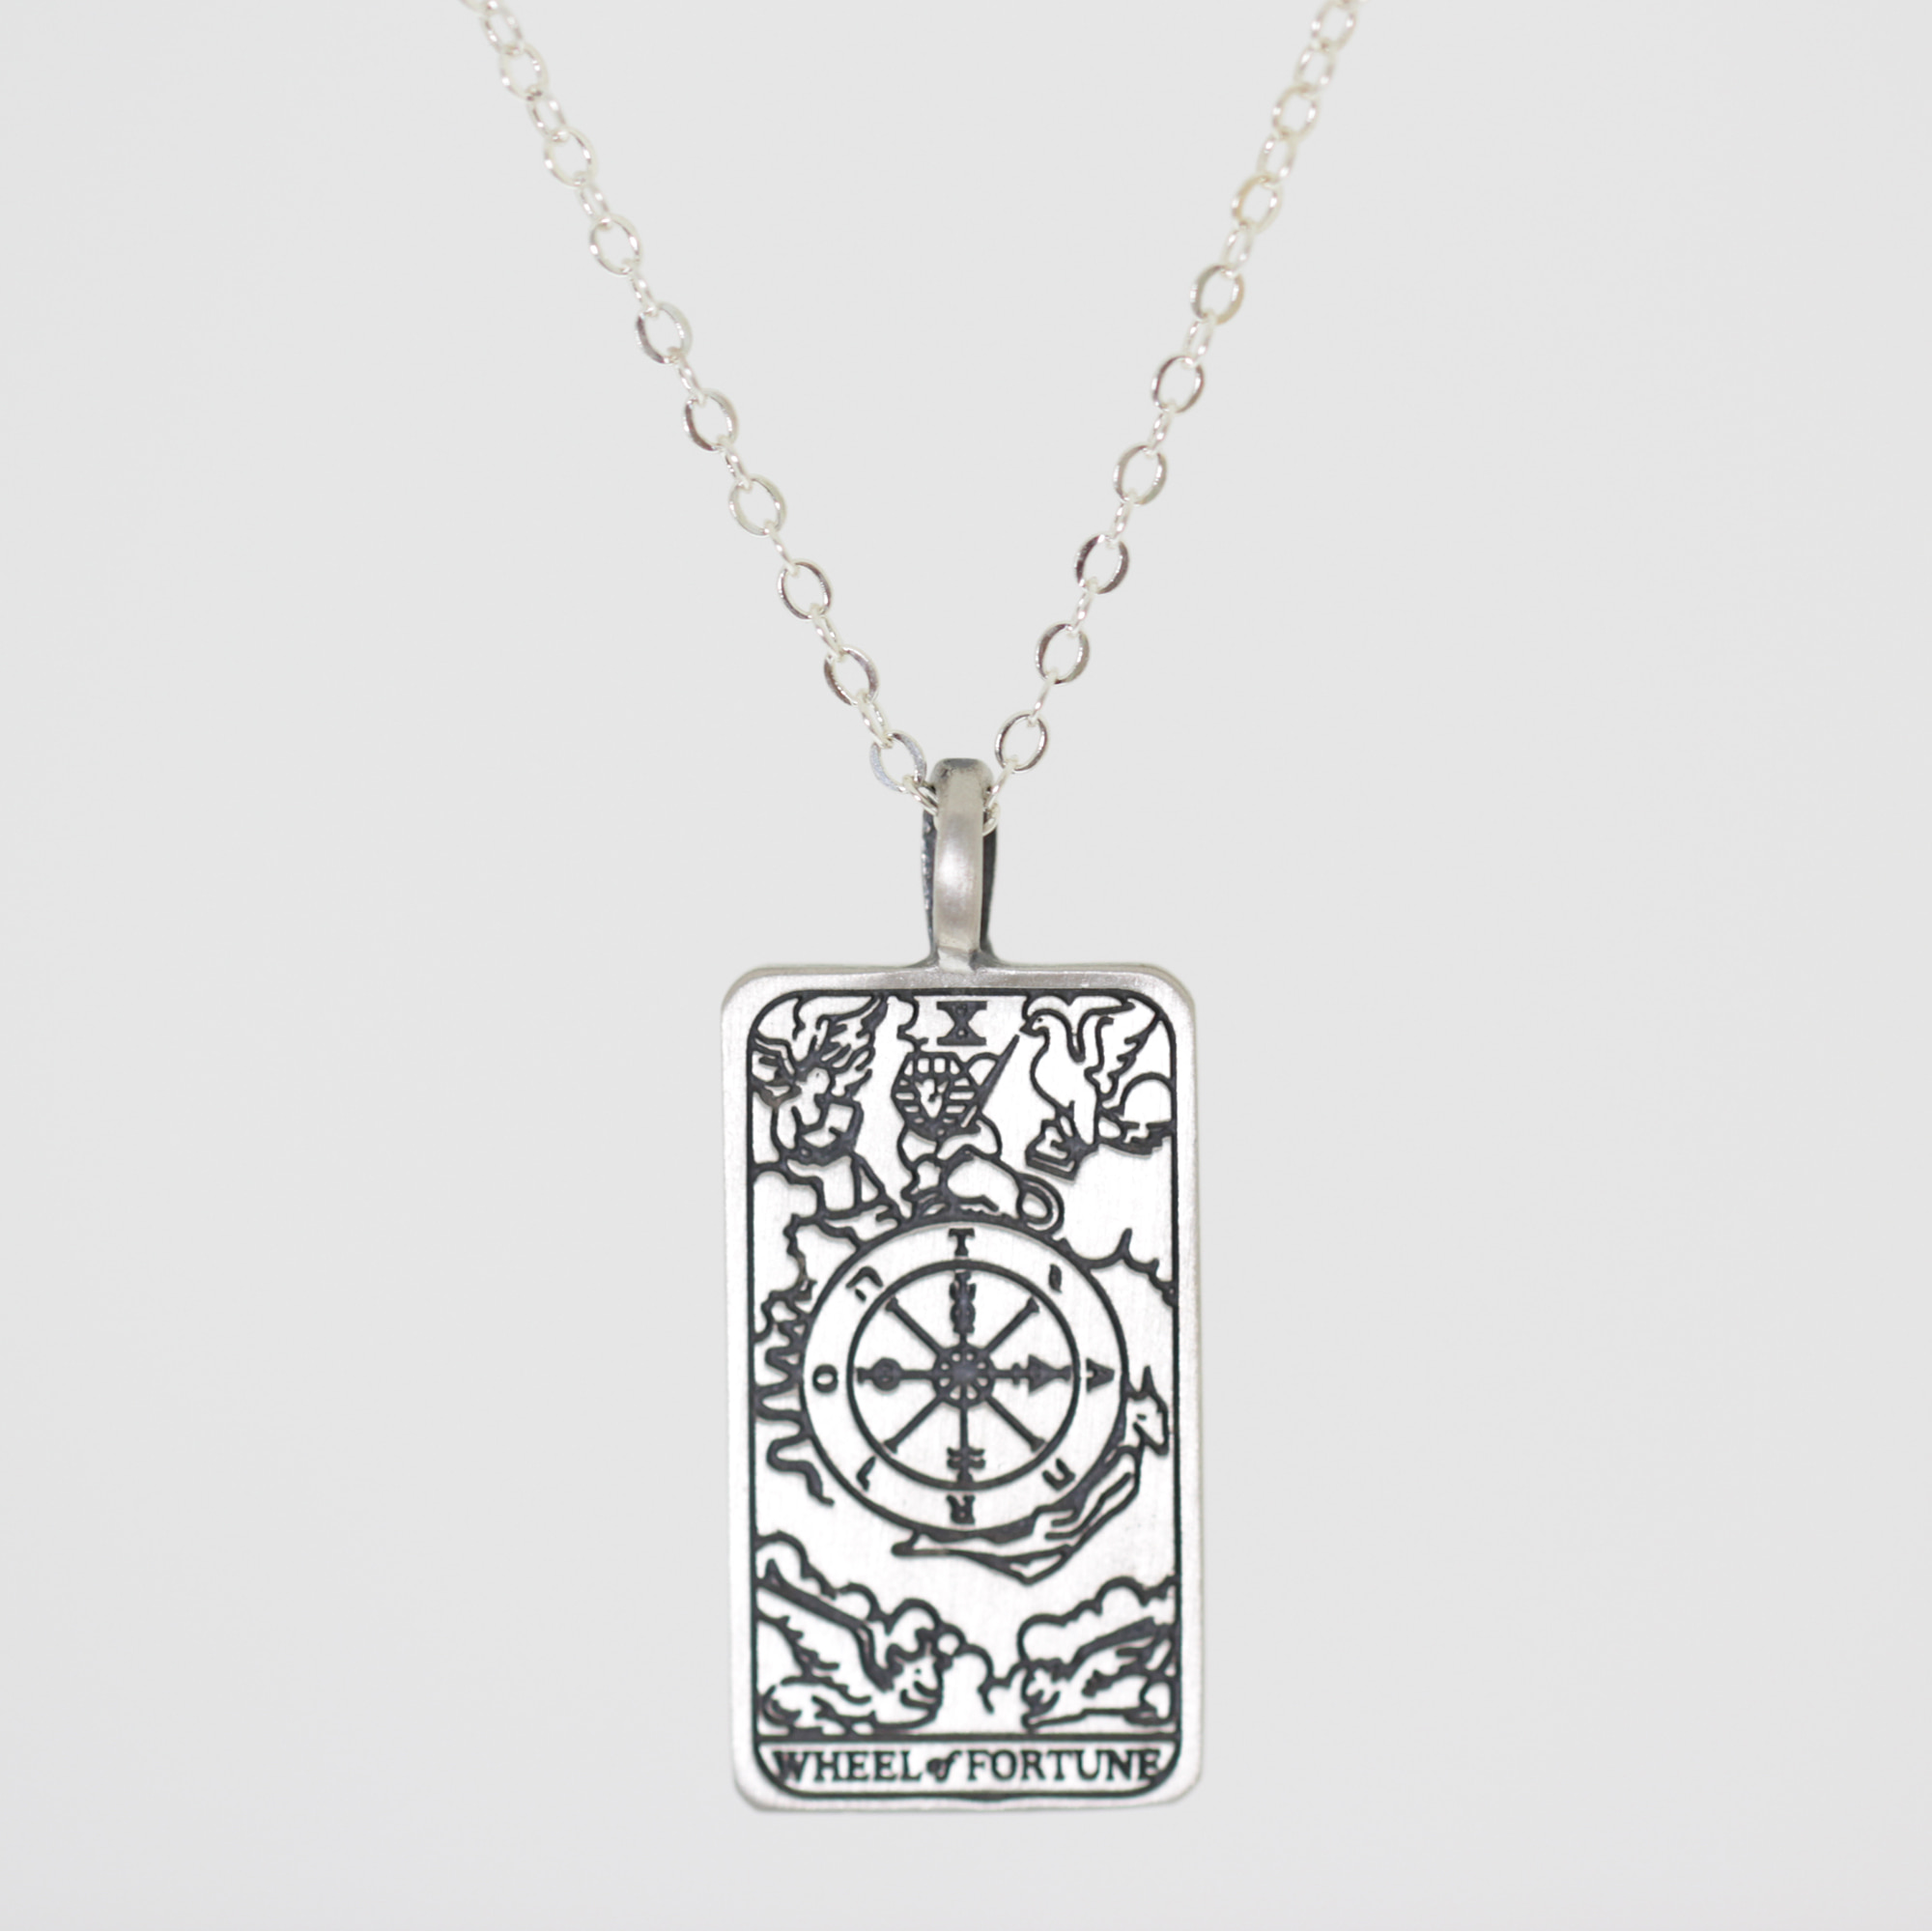 Wheel of fortune tarot necklace